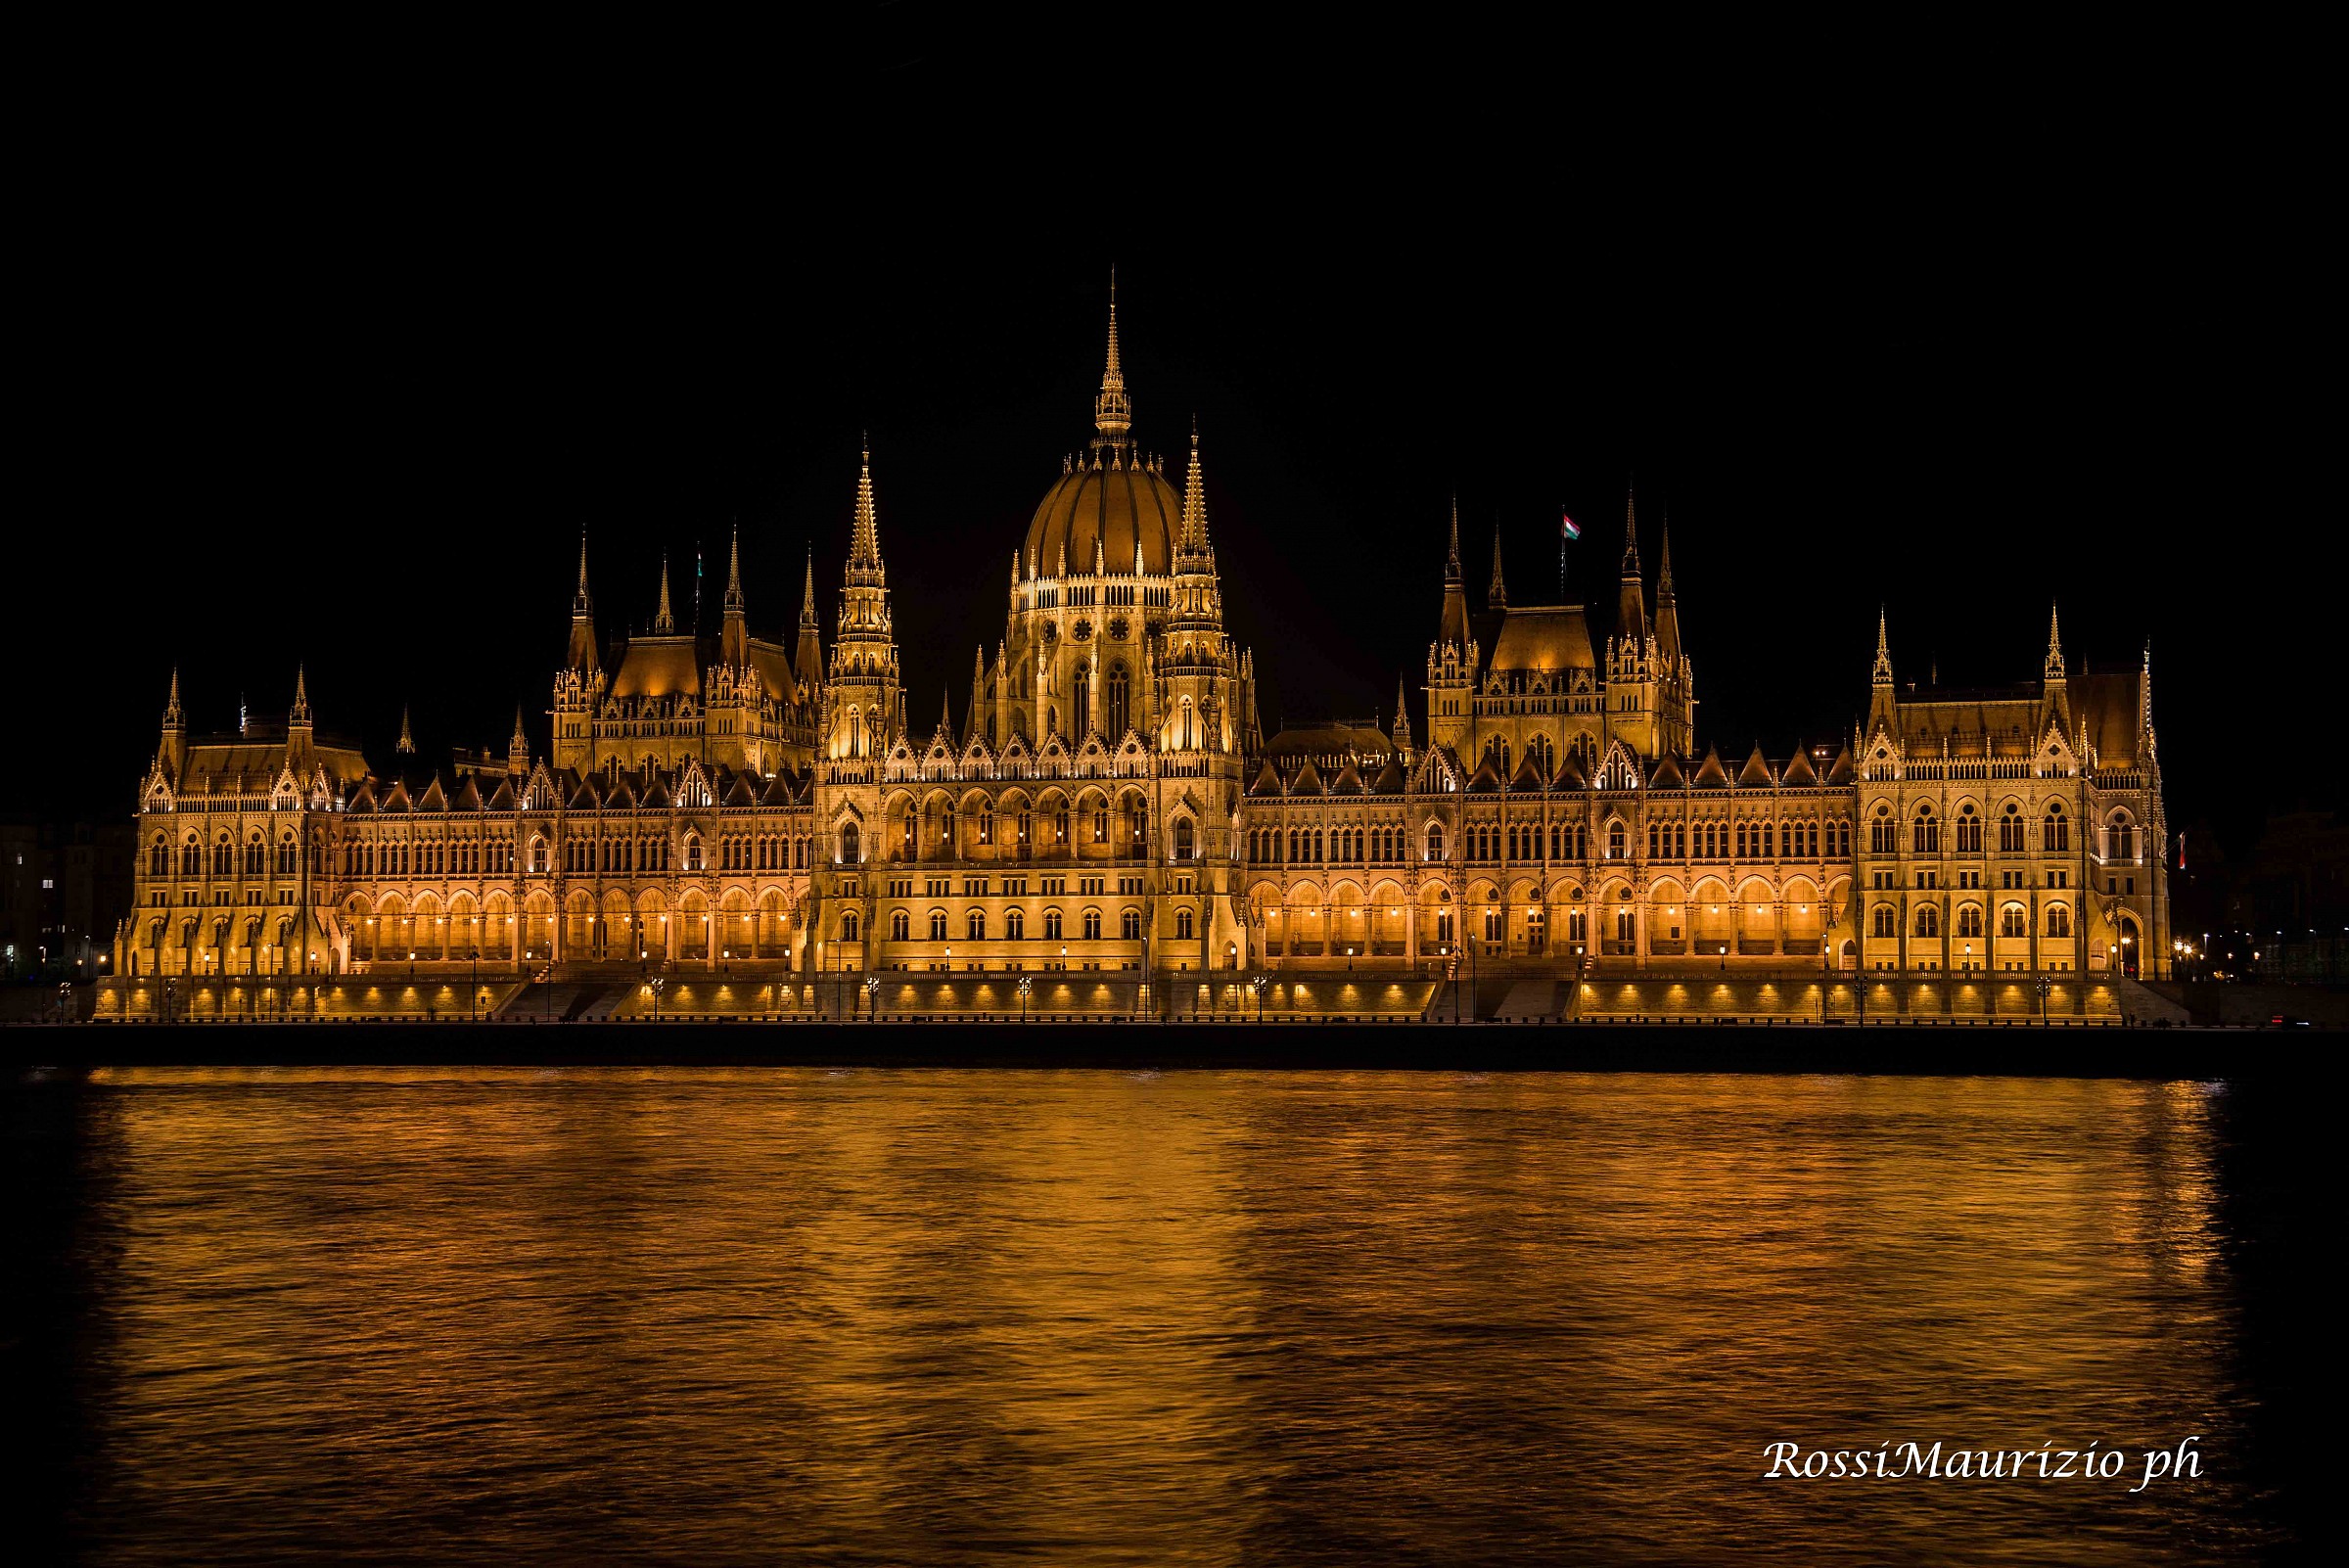 On the banks of the Danube gold ........